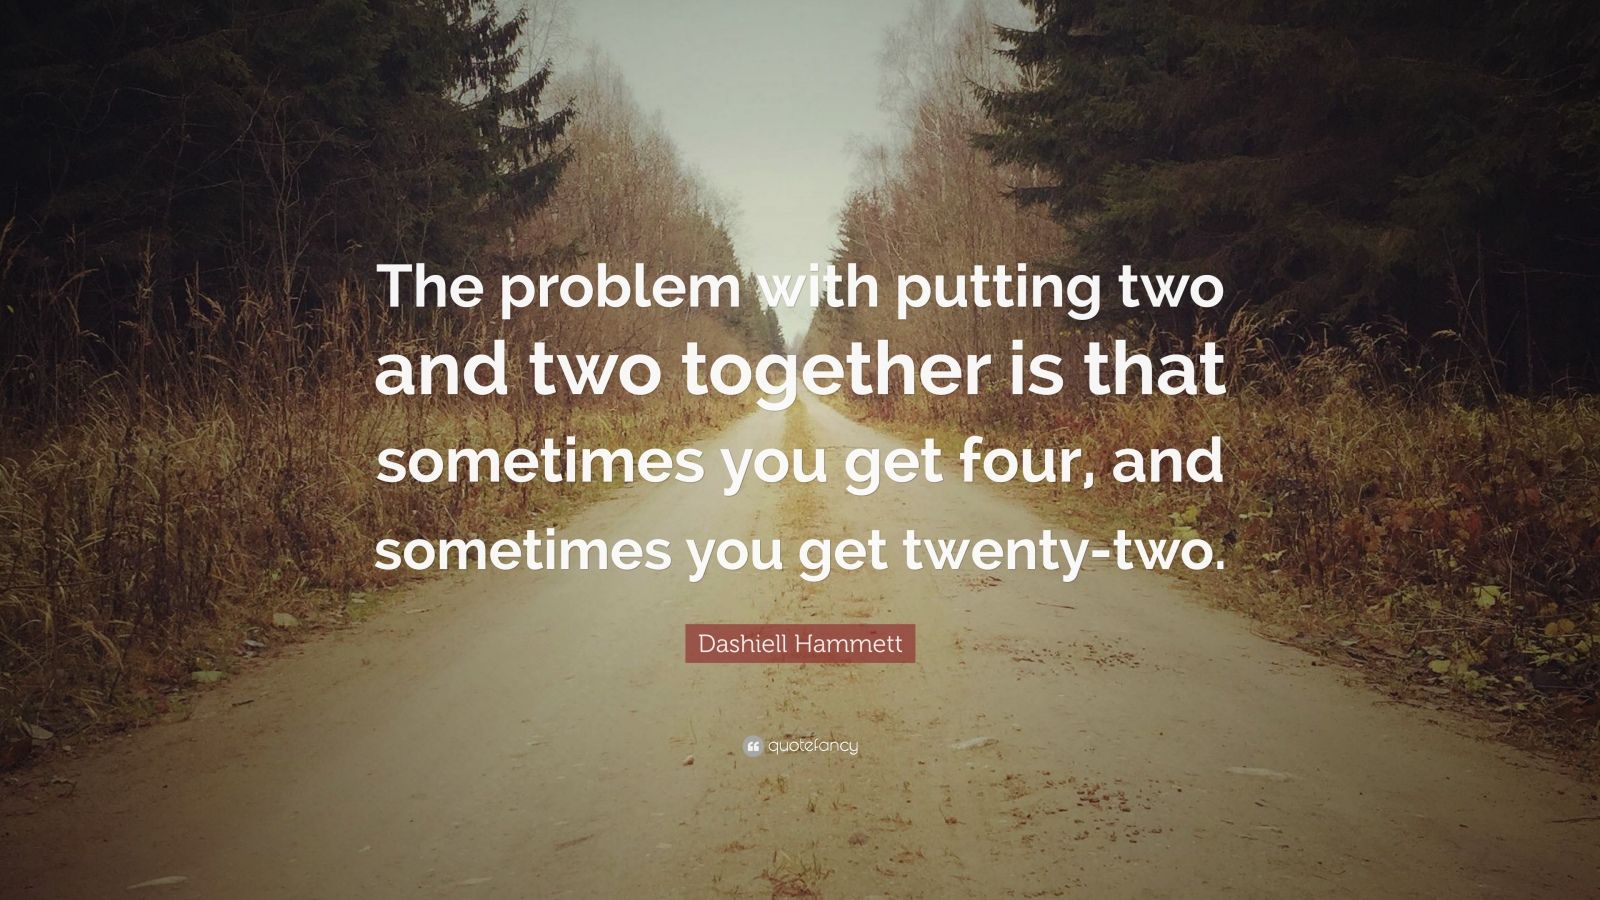 Dashiell Hammett Quote: The problem with putting two and two together